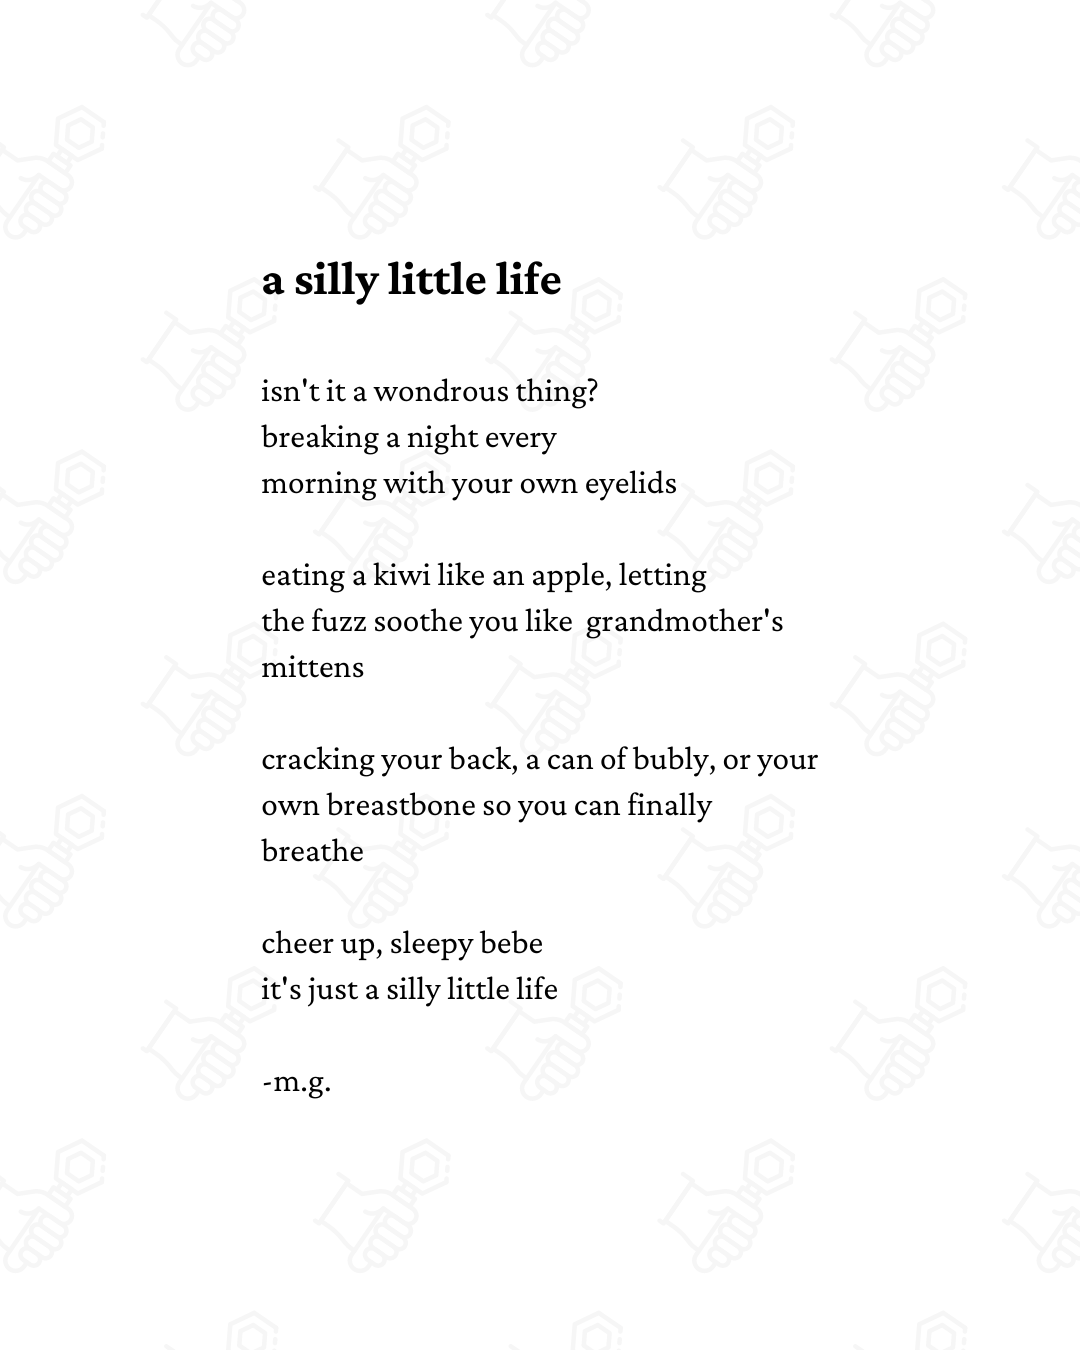 "a silly little life"